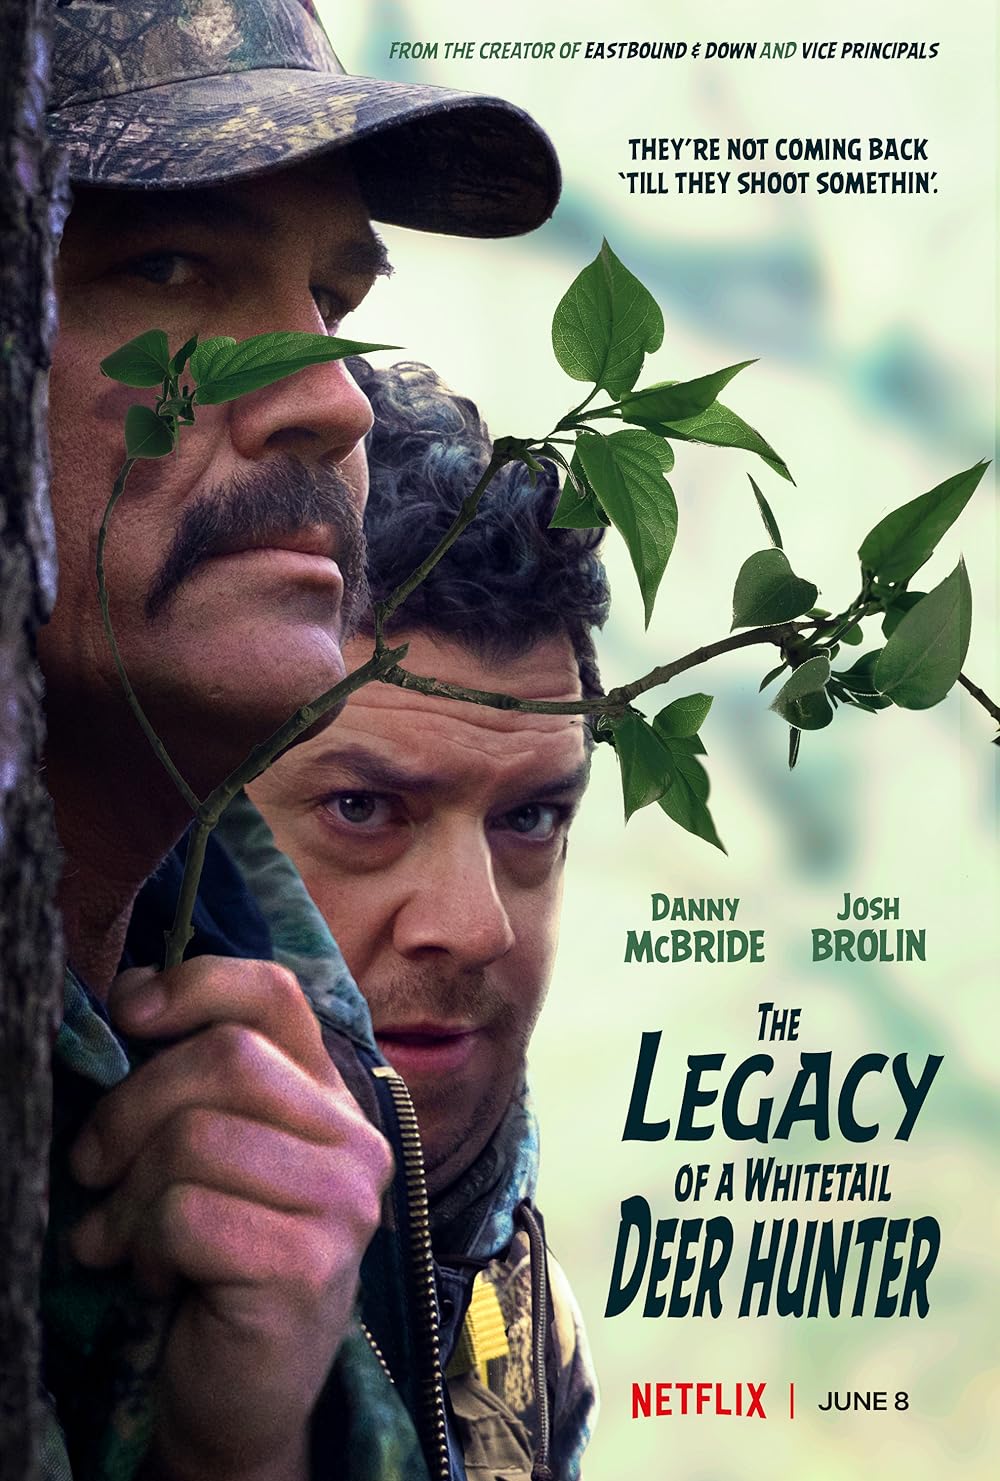 The Legacy of a Whitetail Deer Hunter (2018) 640Kbps 23.976Fps 48Khz 5.1Ch DD+ NF E-AC3 Turkish Audio TAC